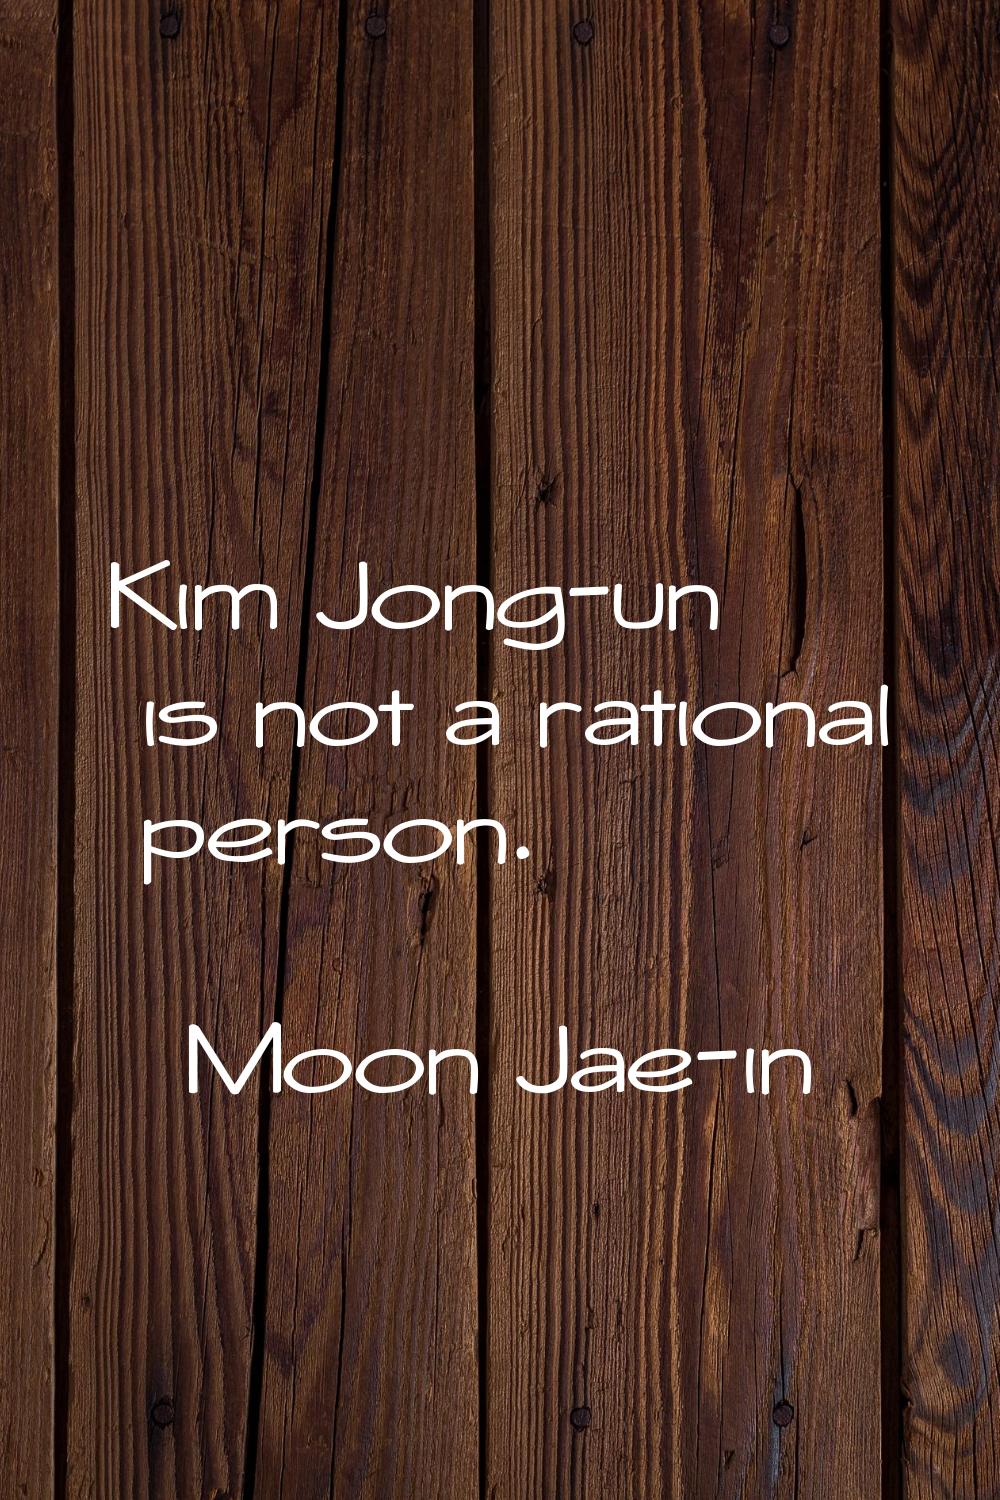 Kim Jong-un is not a rational person.